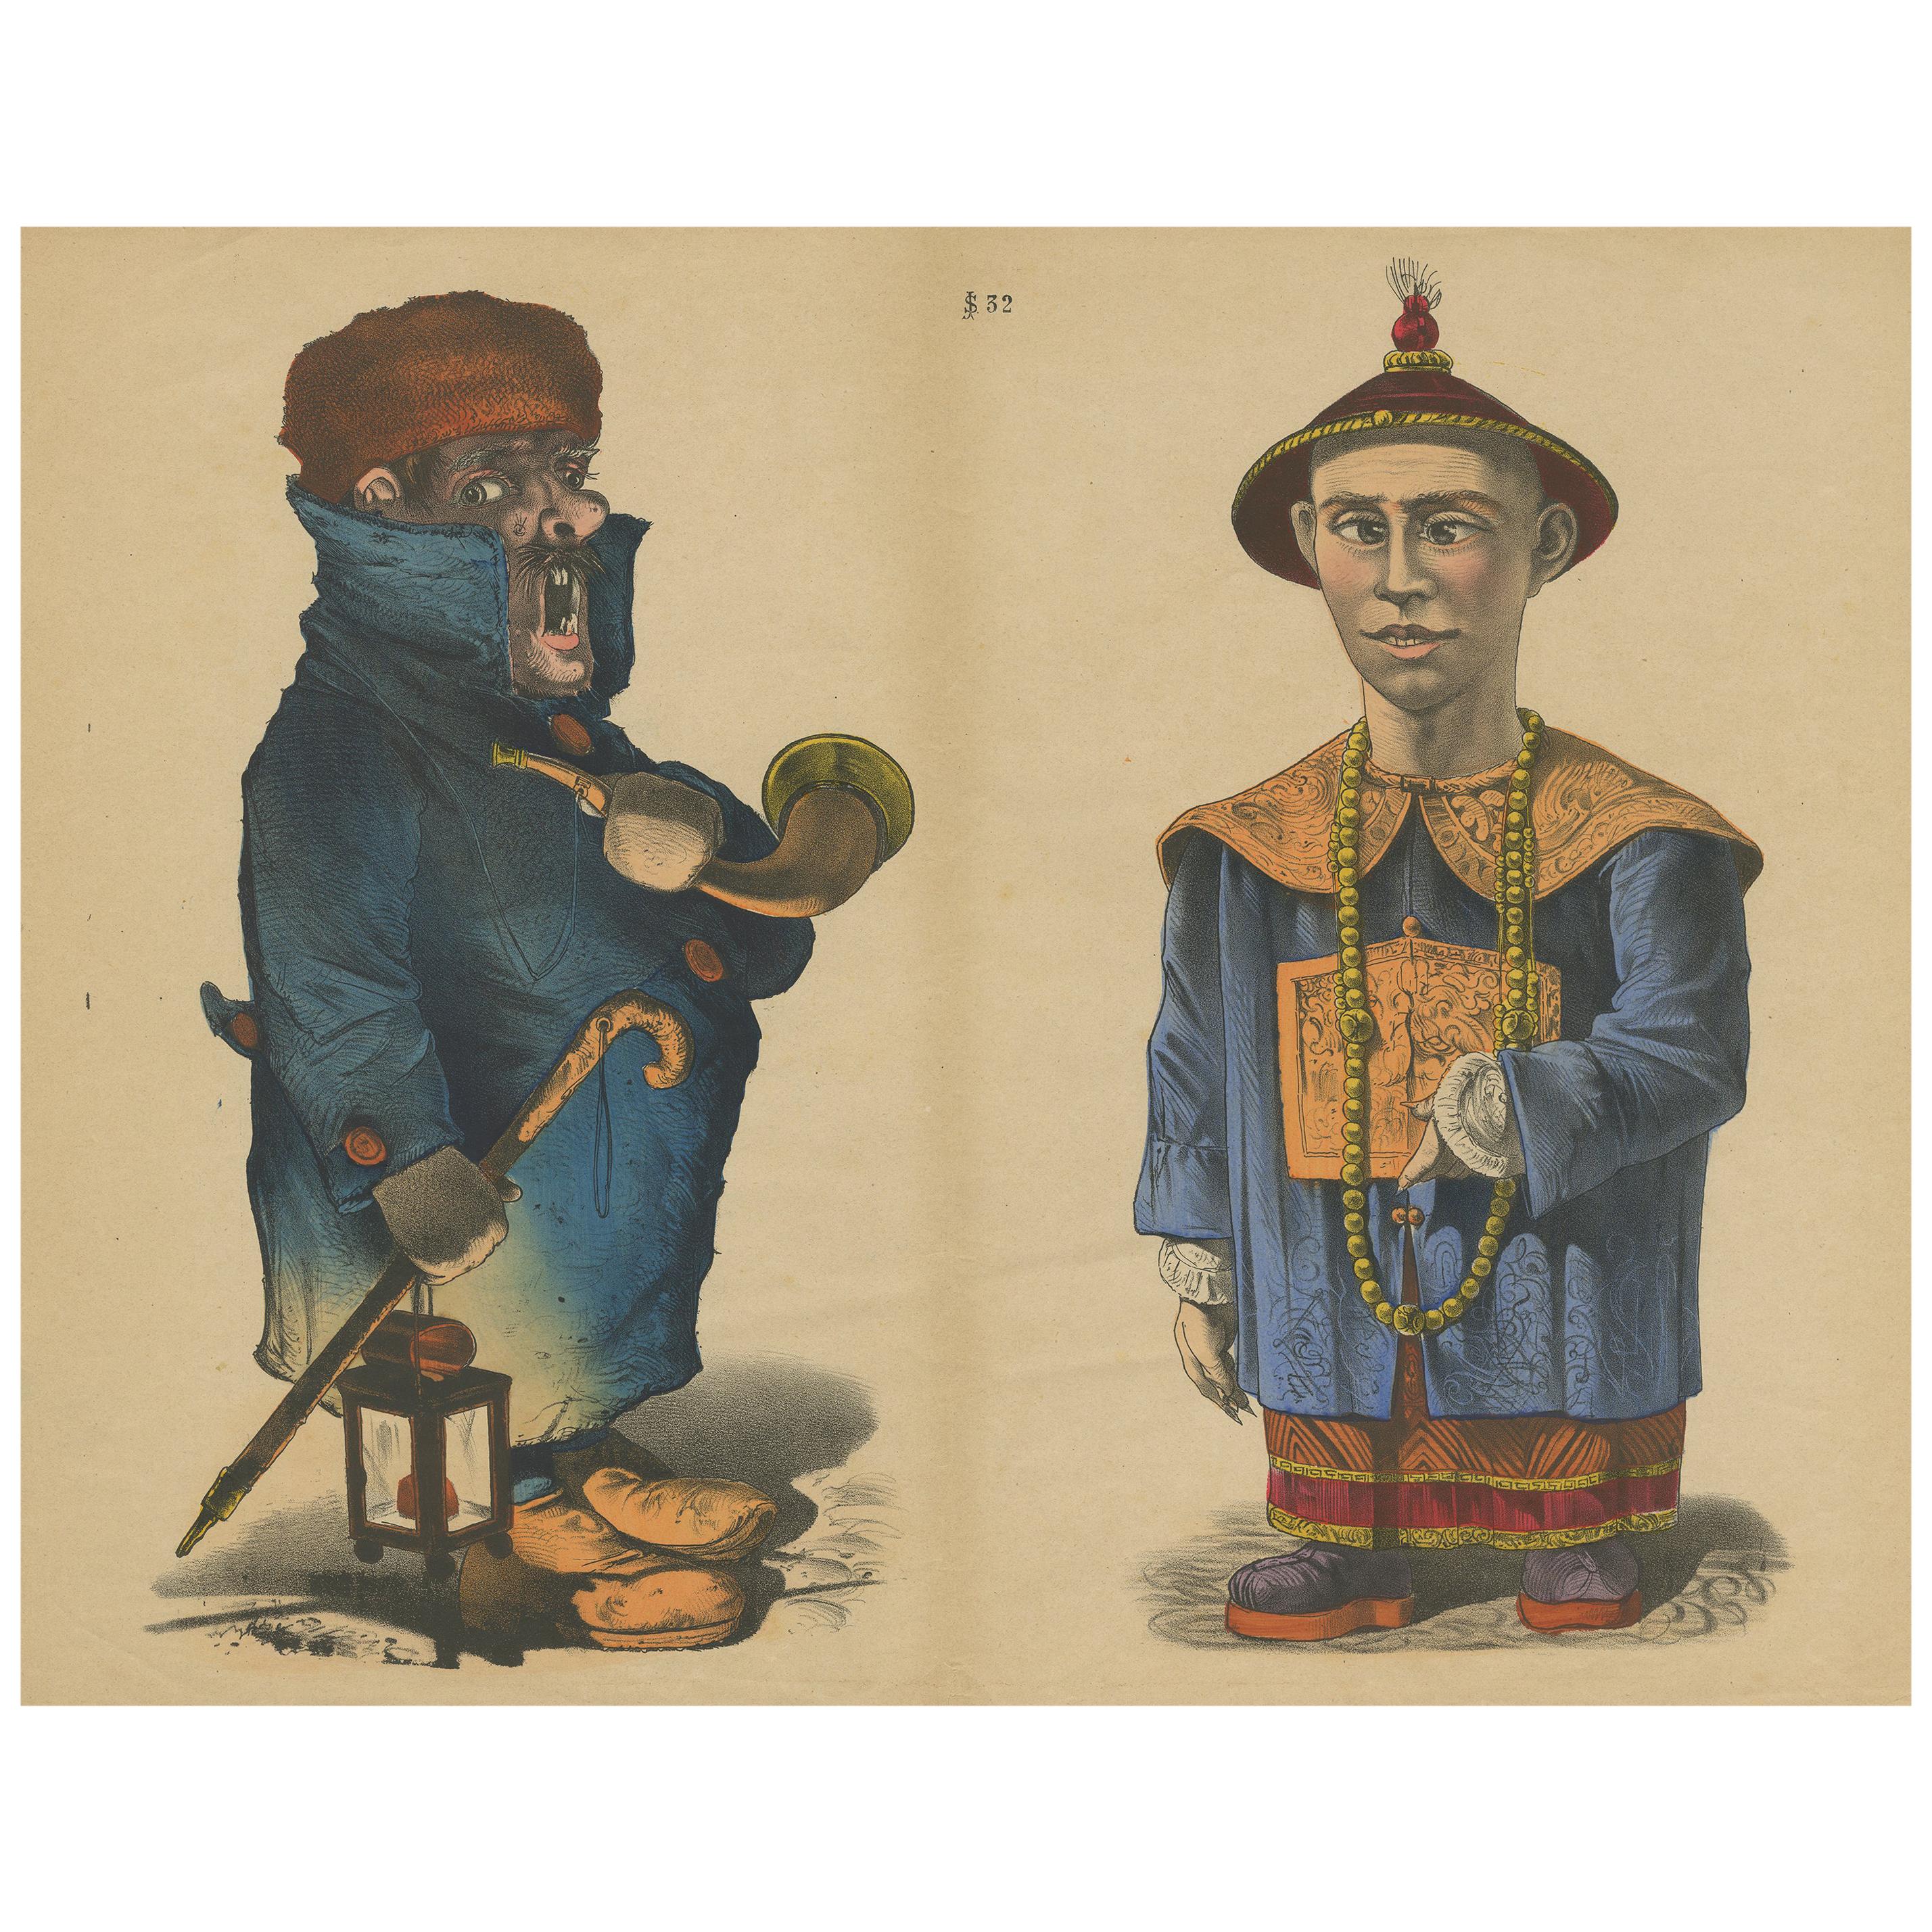 Antique Caricature Print of a Man with Horn and Asian Native 'c.1860'